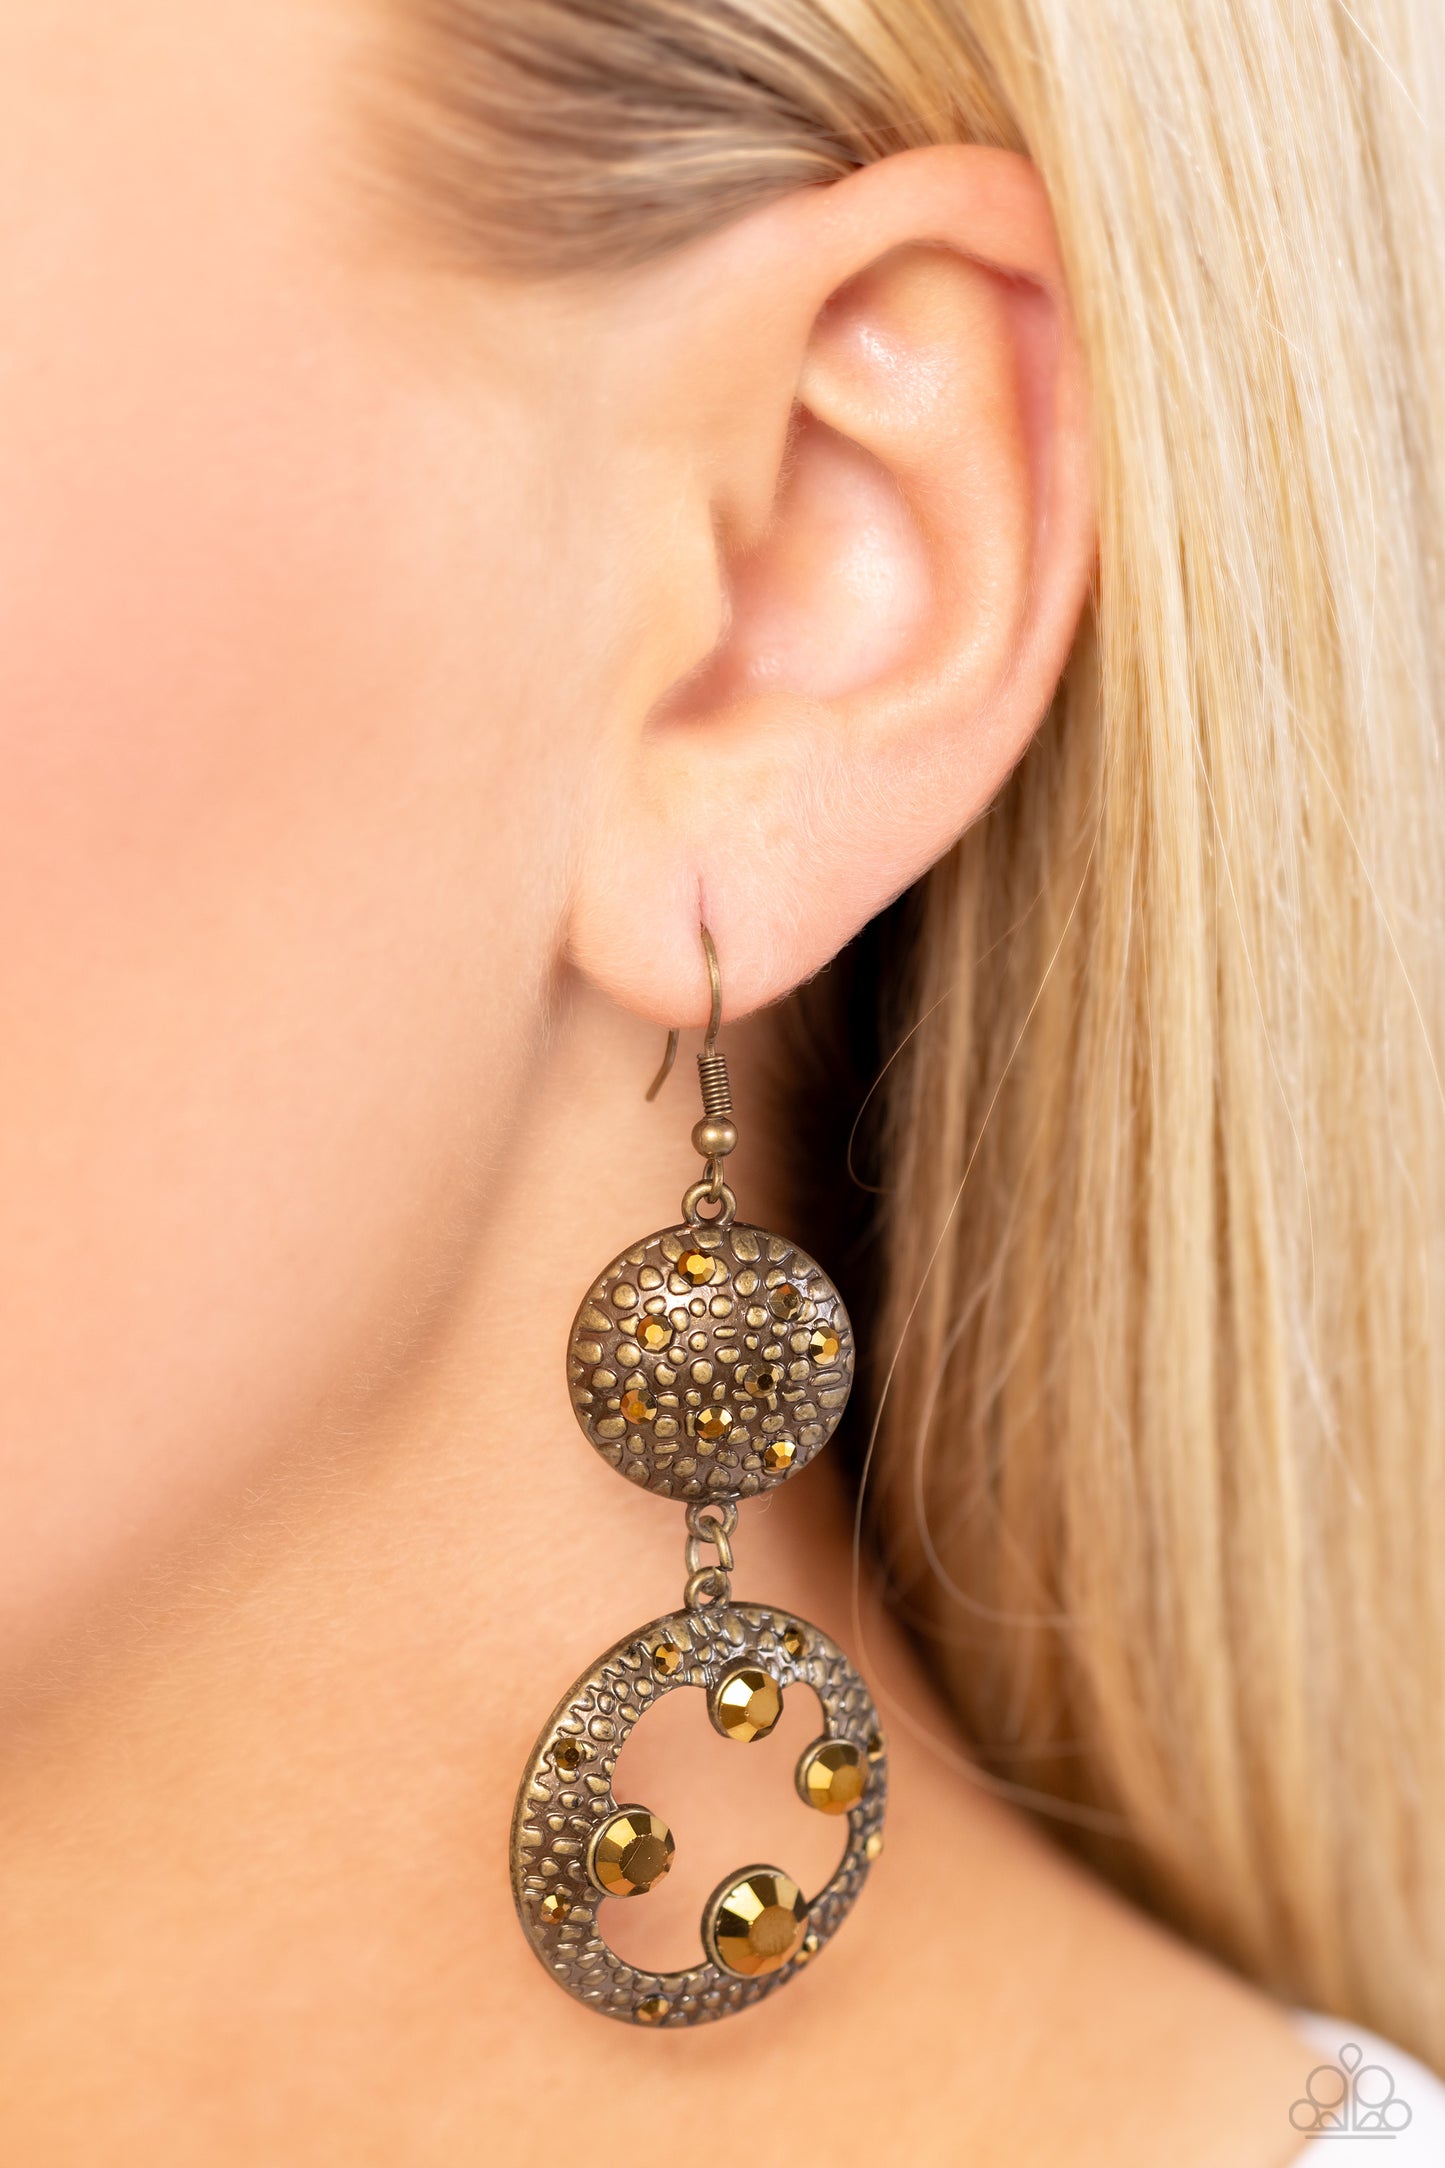 Dotted with dainty aurum rhinestones and embossed in pebble-like textures, a beveled brass circle attaches to an imperfect brass hoop featuring matching texture. A smattering of oversized aurum rhinestones haphazardly adorns the hoop, resulting in a gritty shimmer. Earring attaches to a standard fishhook fitting.  Sold as one pair of earrings.